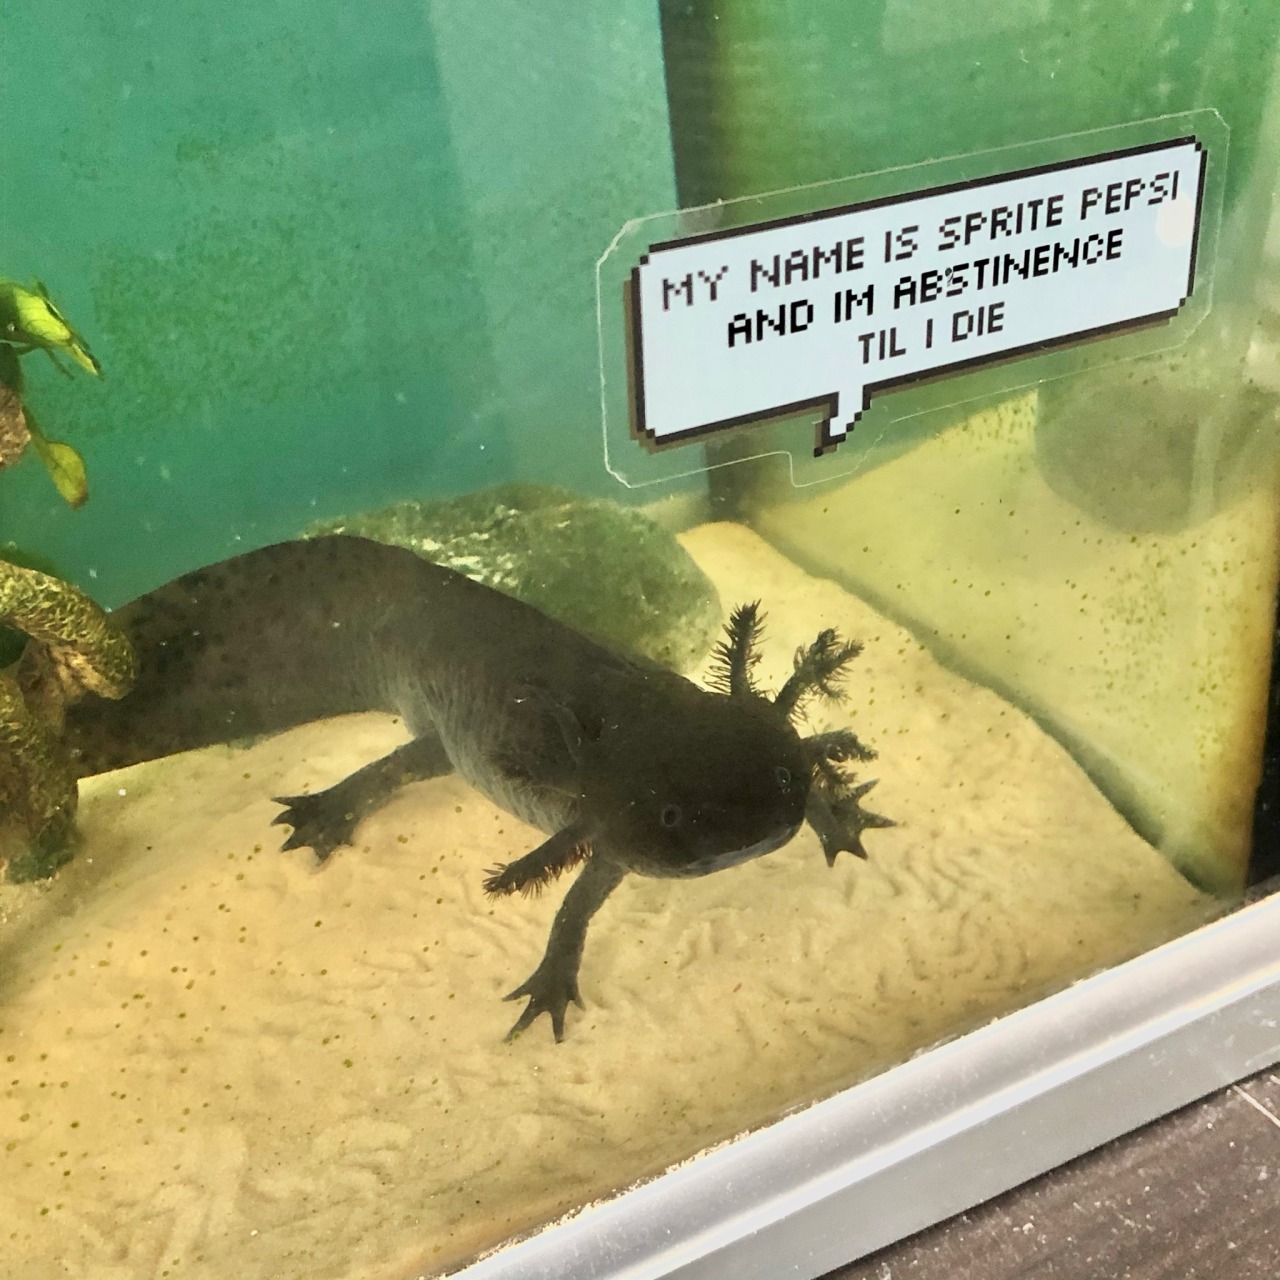 image of a black axolotl with a white underbelly next to a speech bubble that says "my name is Sprite Pepsi and I'm abstinace until I die"